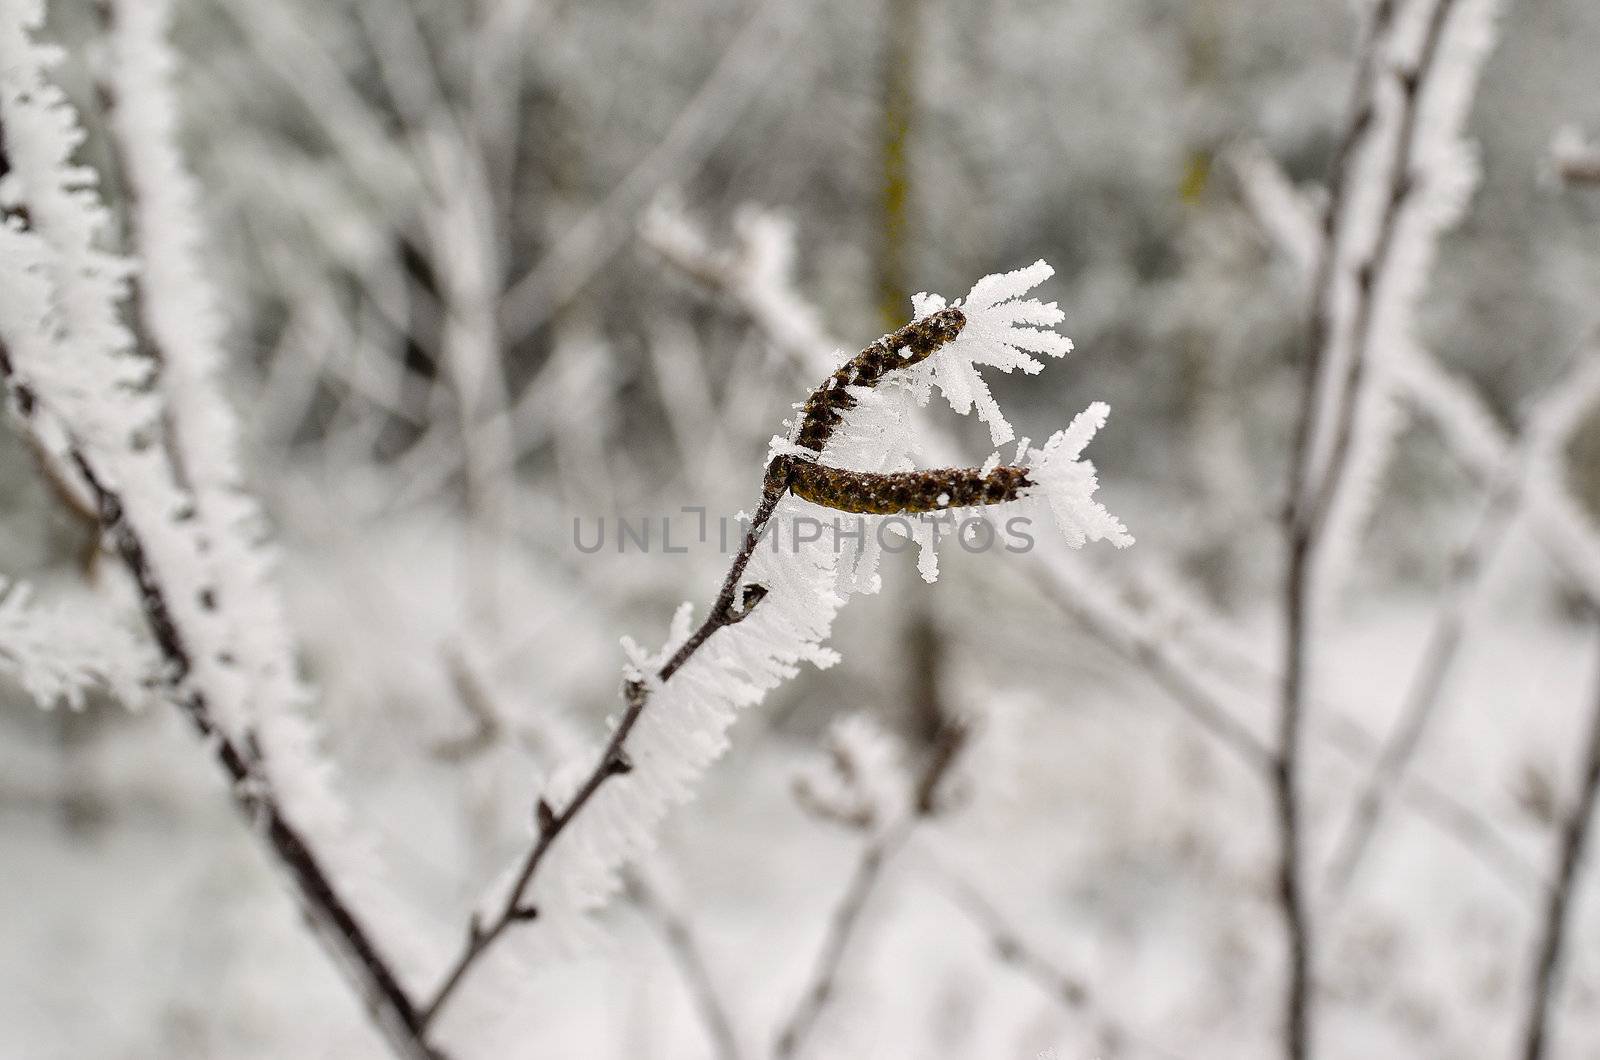 In the picture you can see branch twig covered with hoarfrost on a blurred background.